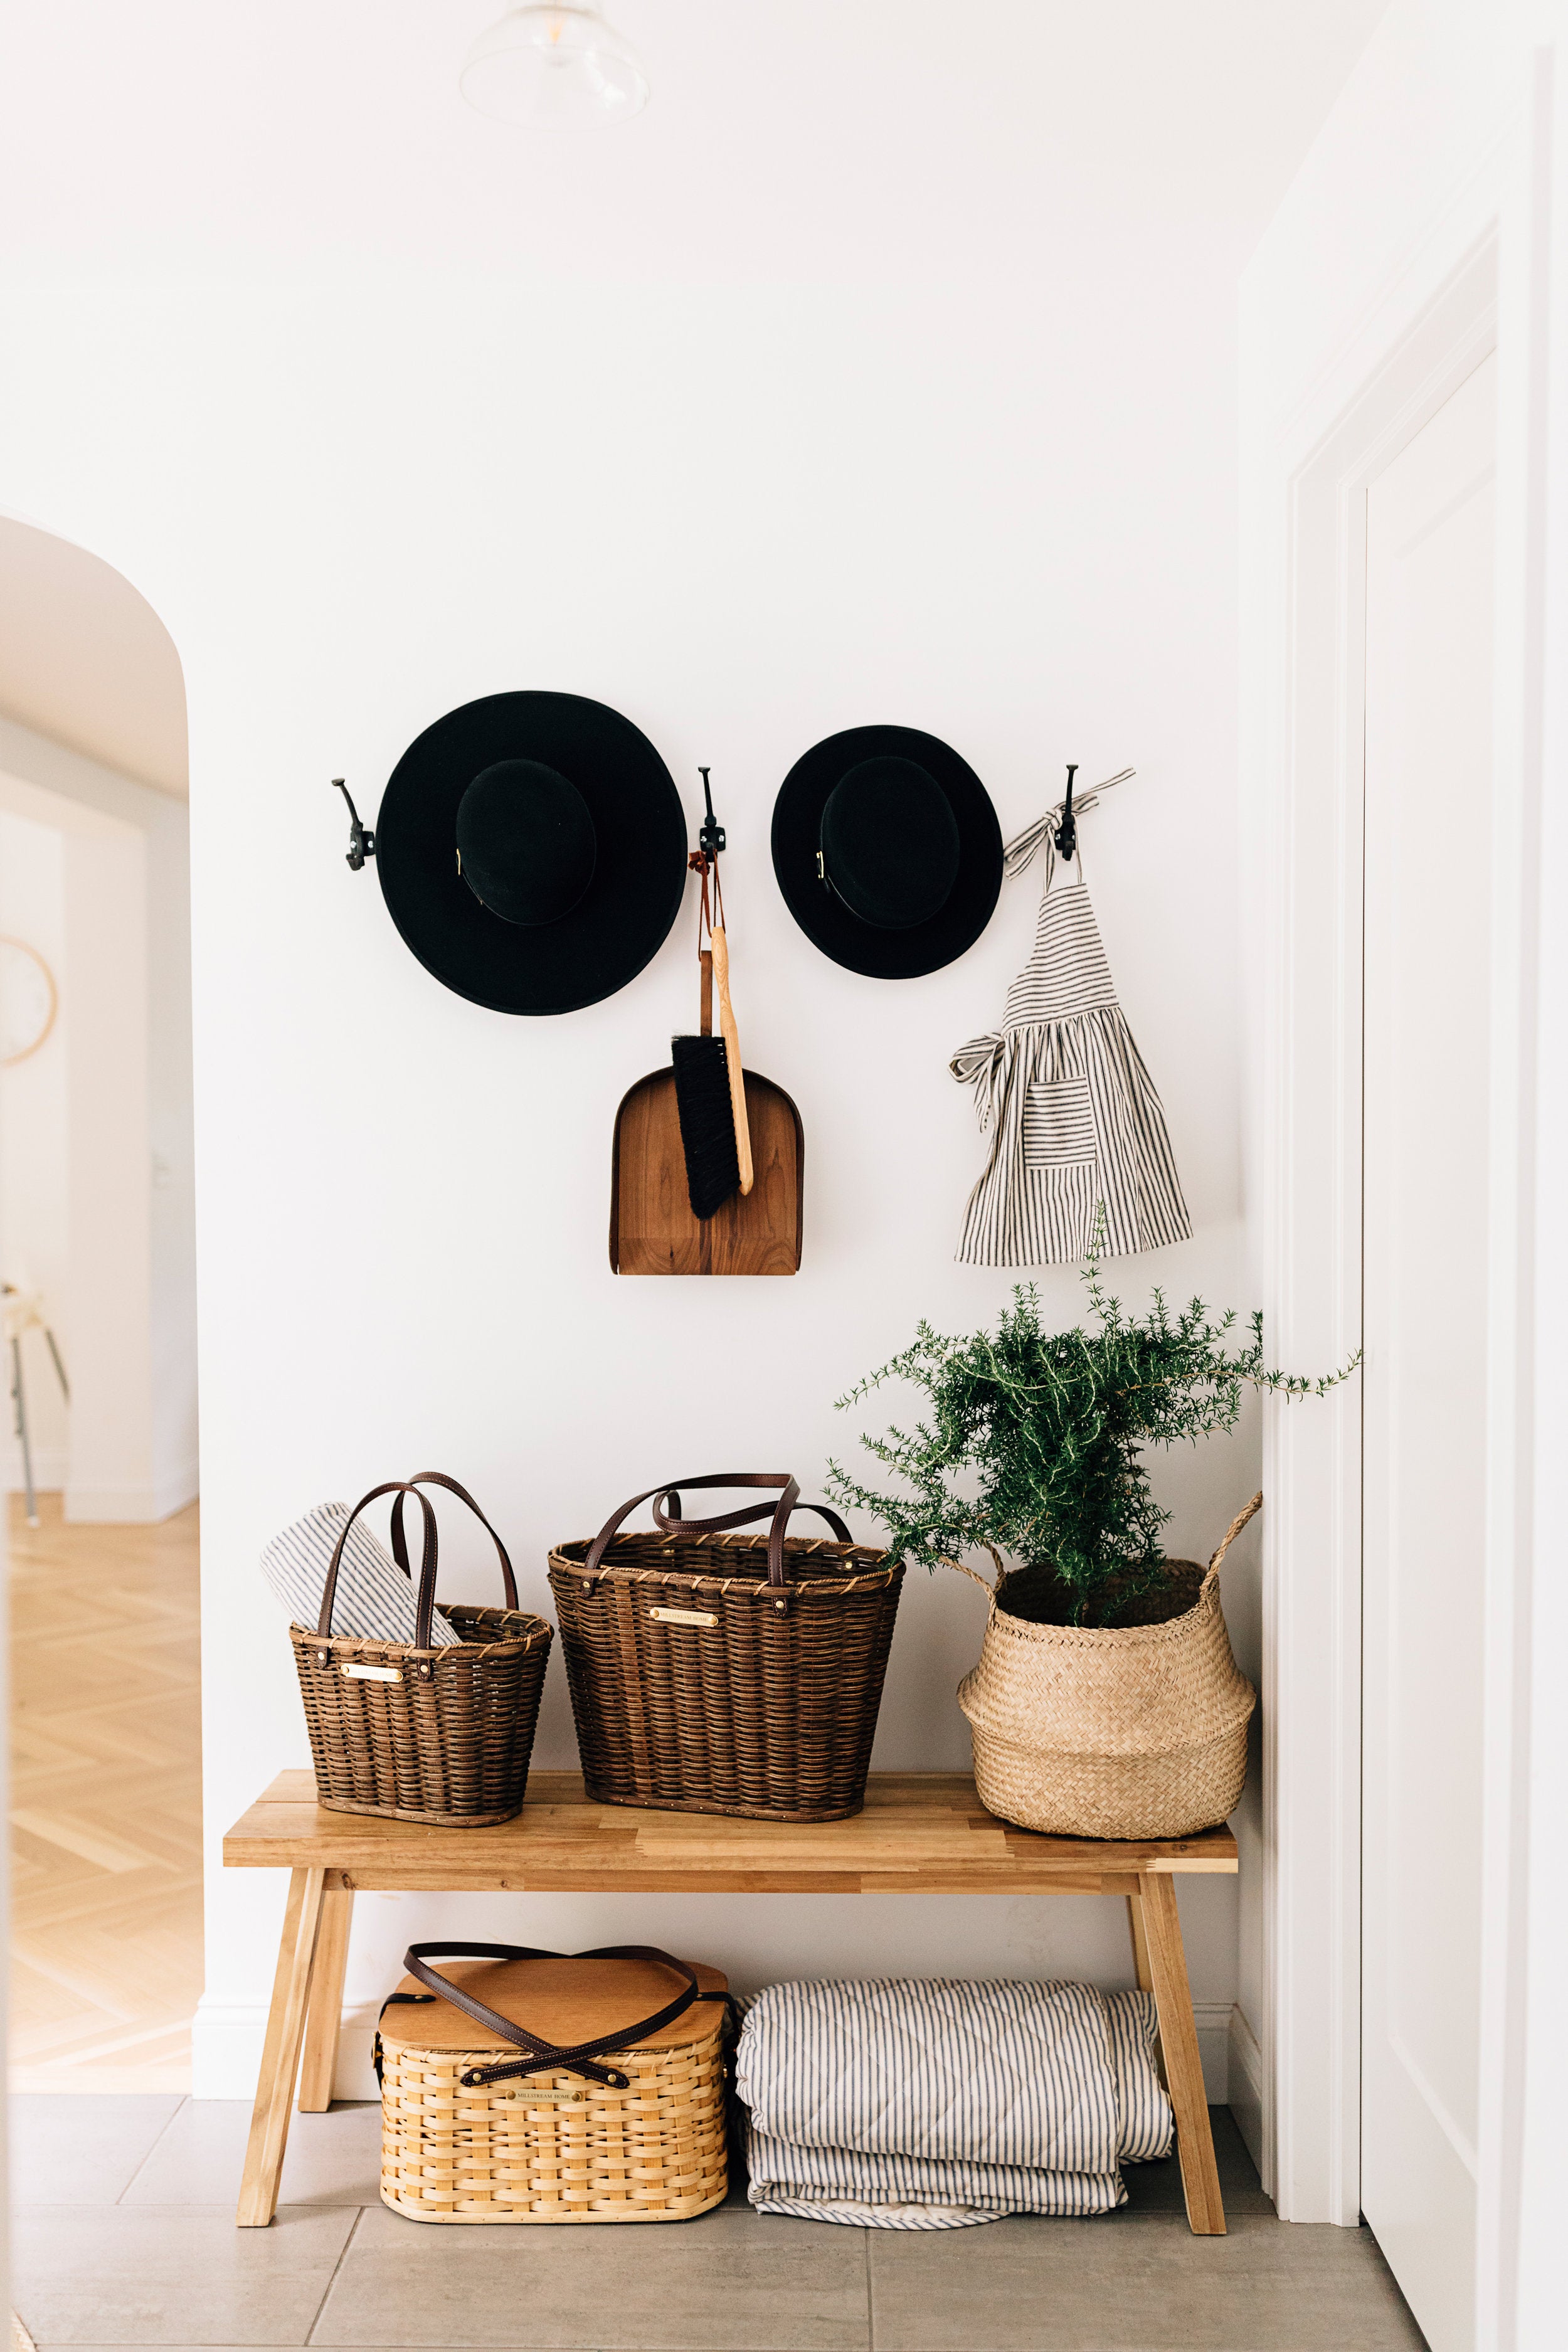 Two Child's Black Saddle Hats Hanging on a Wall